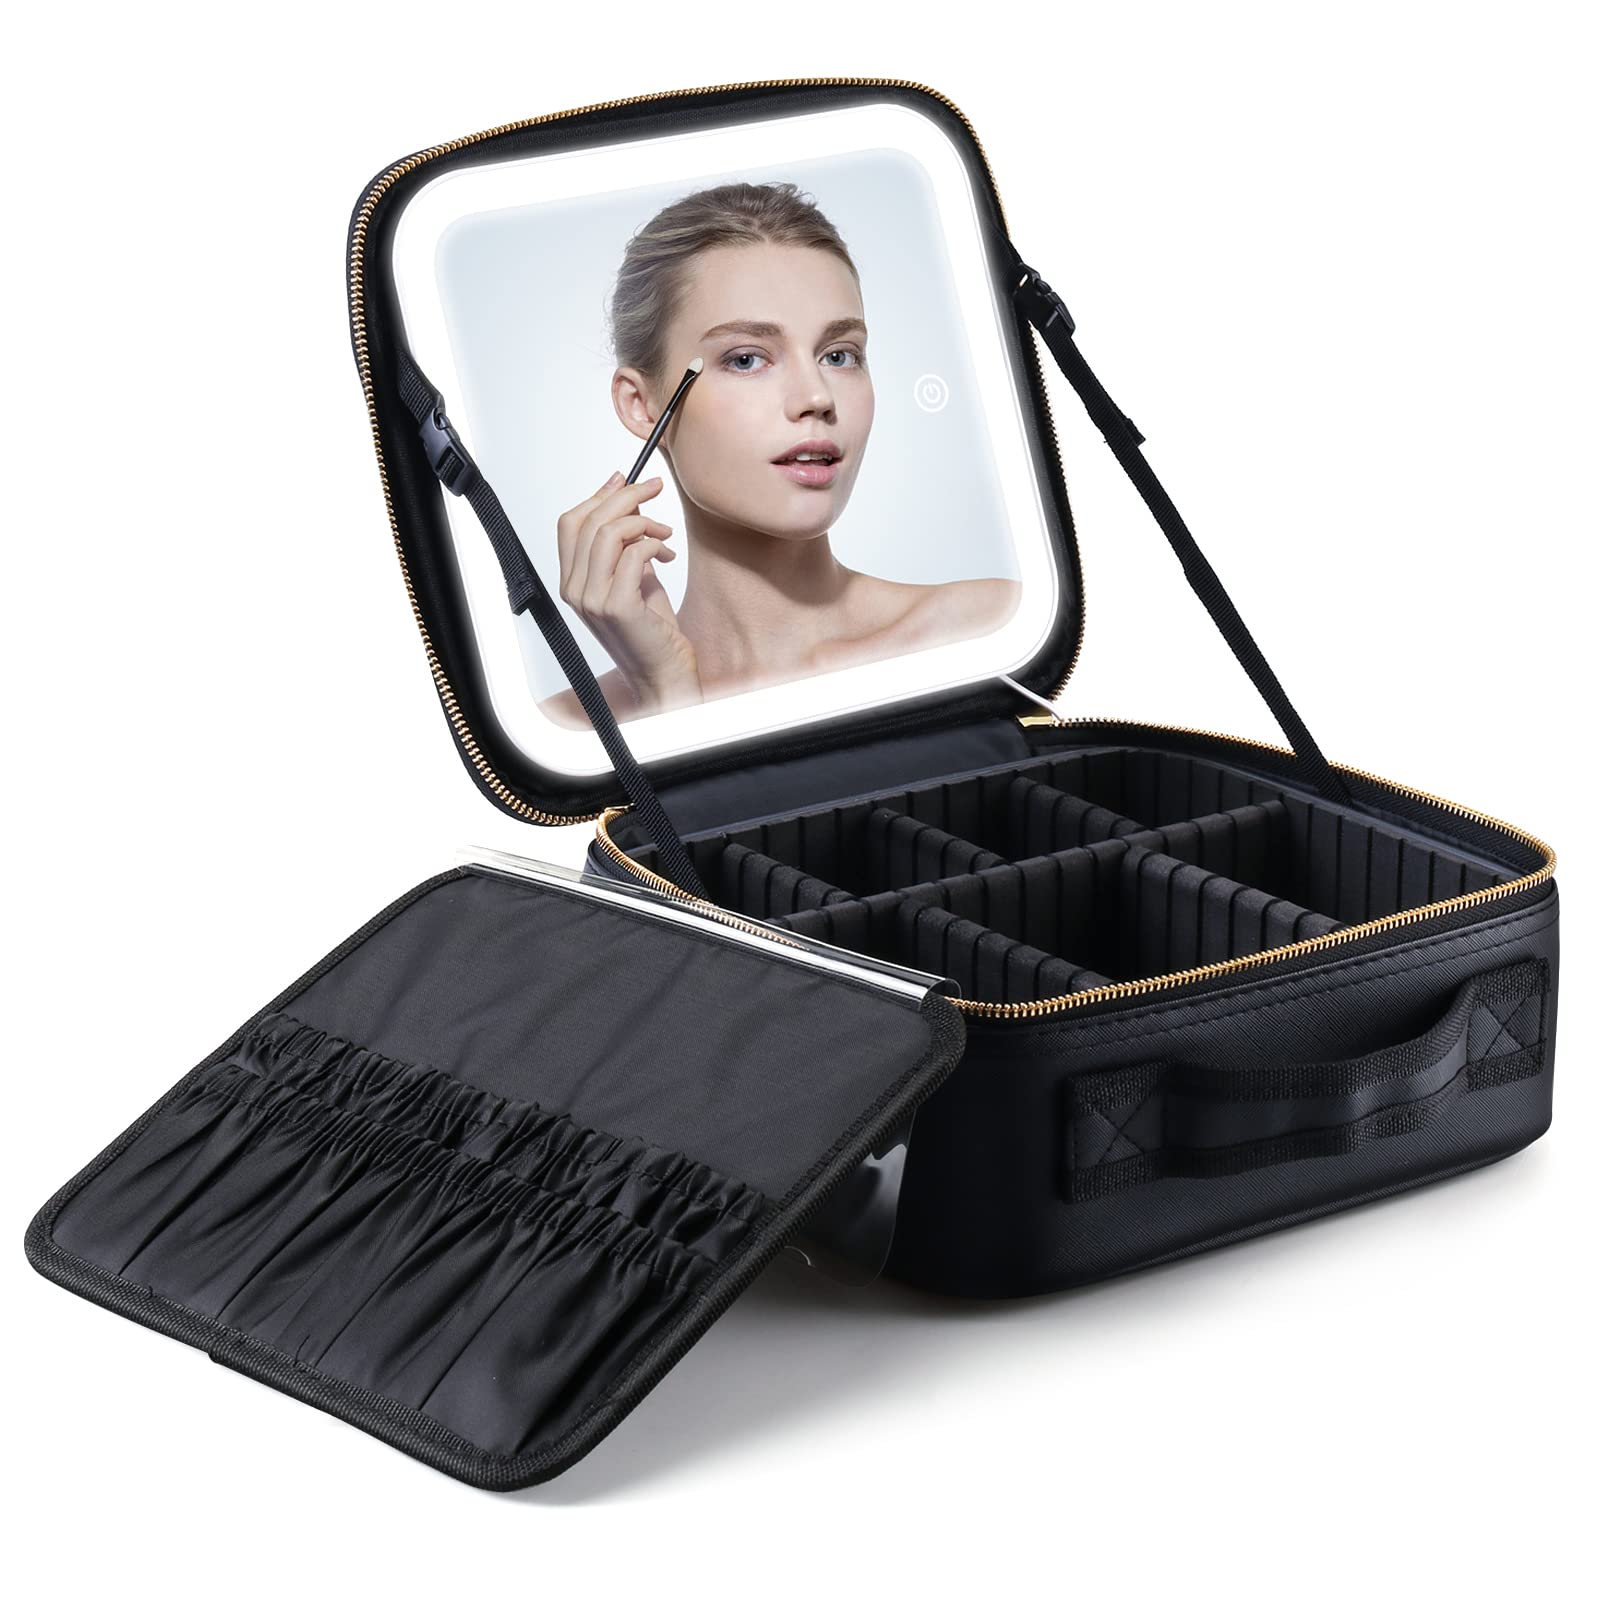 Multifunction LED Makeup Bag with Rechargeable 3-light Mirror dividers